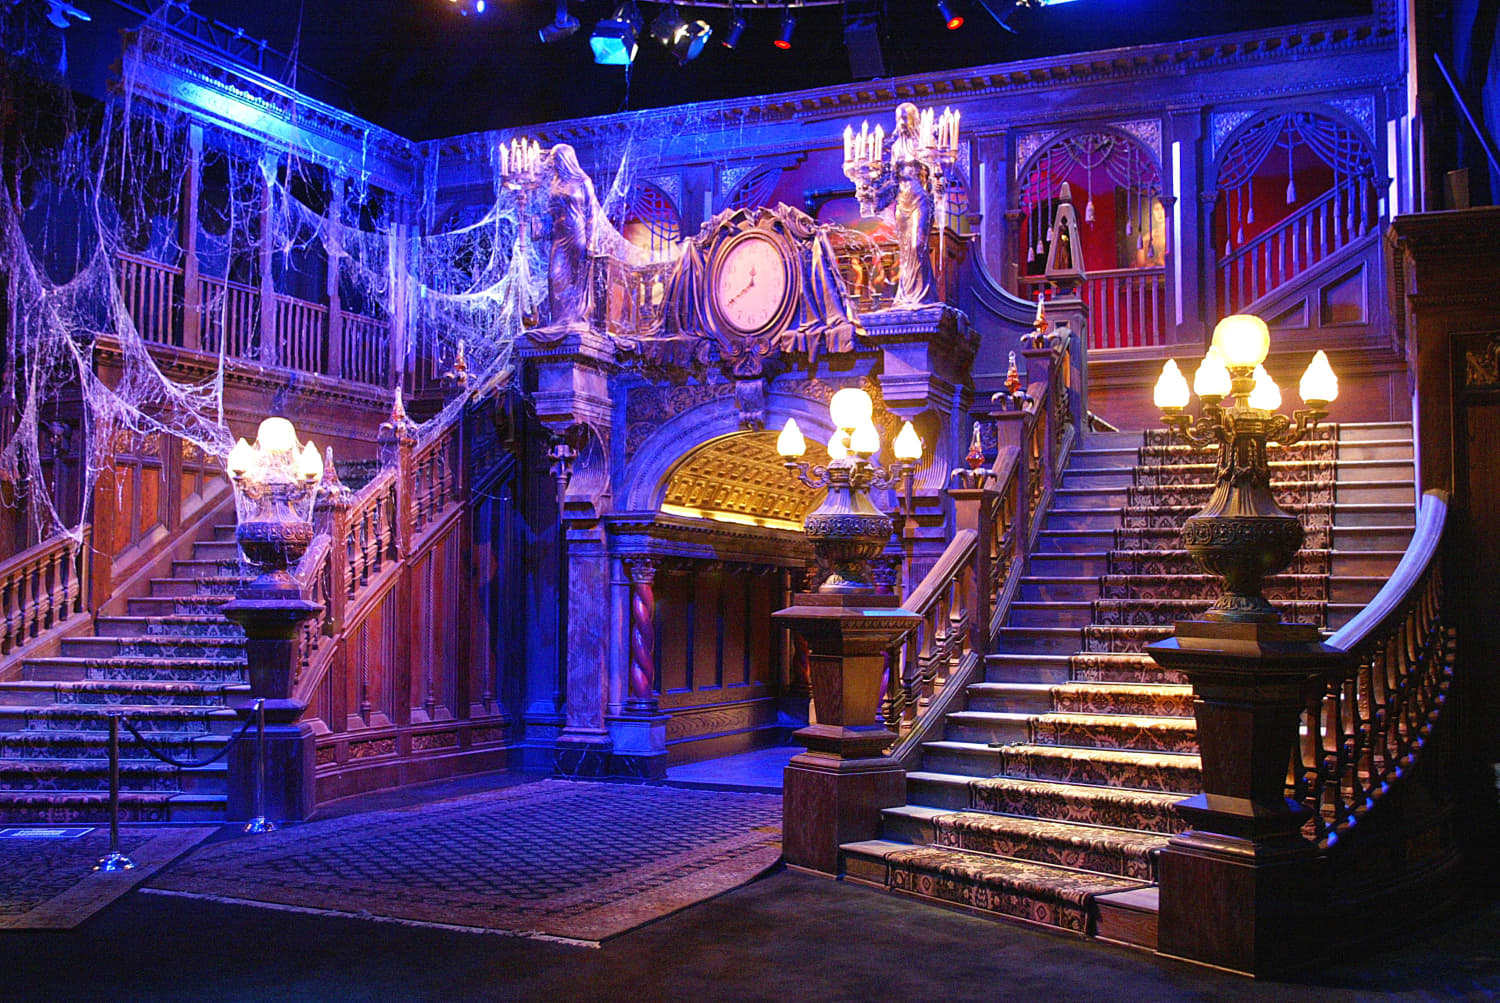 This Disney Fan Converts Their House into the Haunted Mansion Every